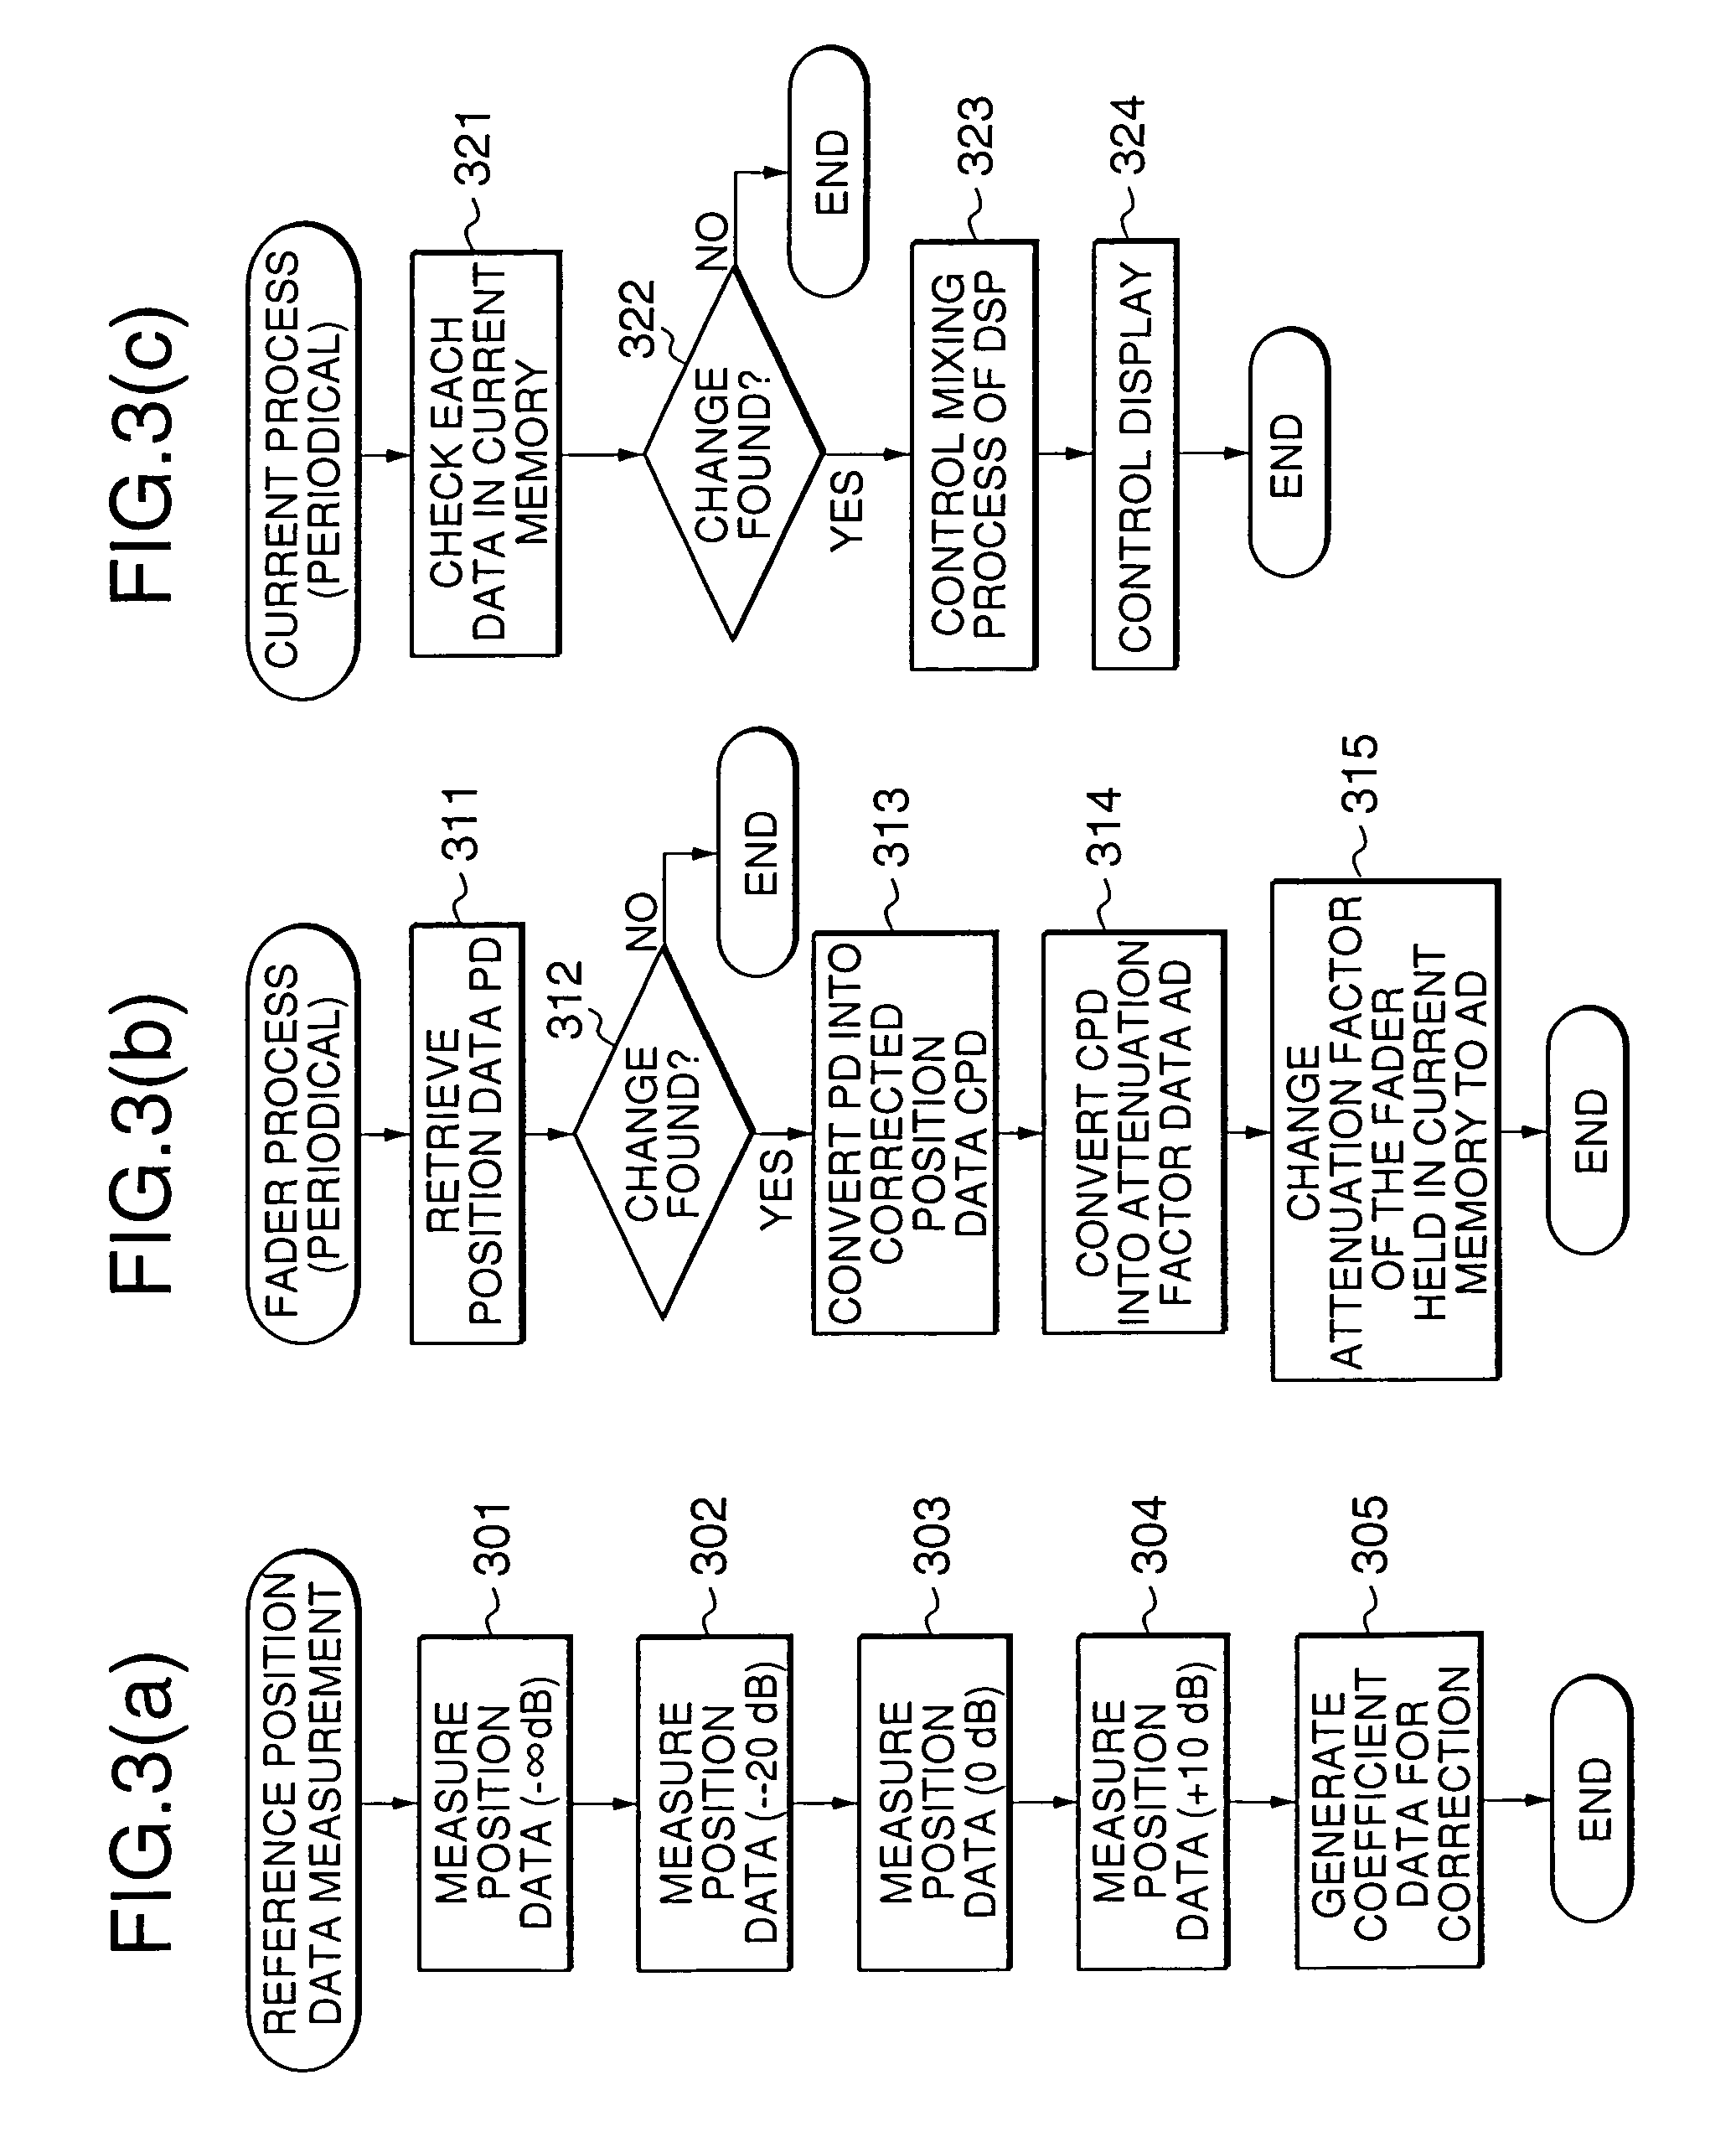 Operation apparatus with auto correction of position data of electric faders